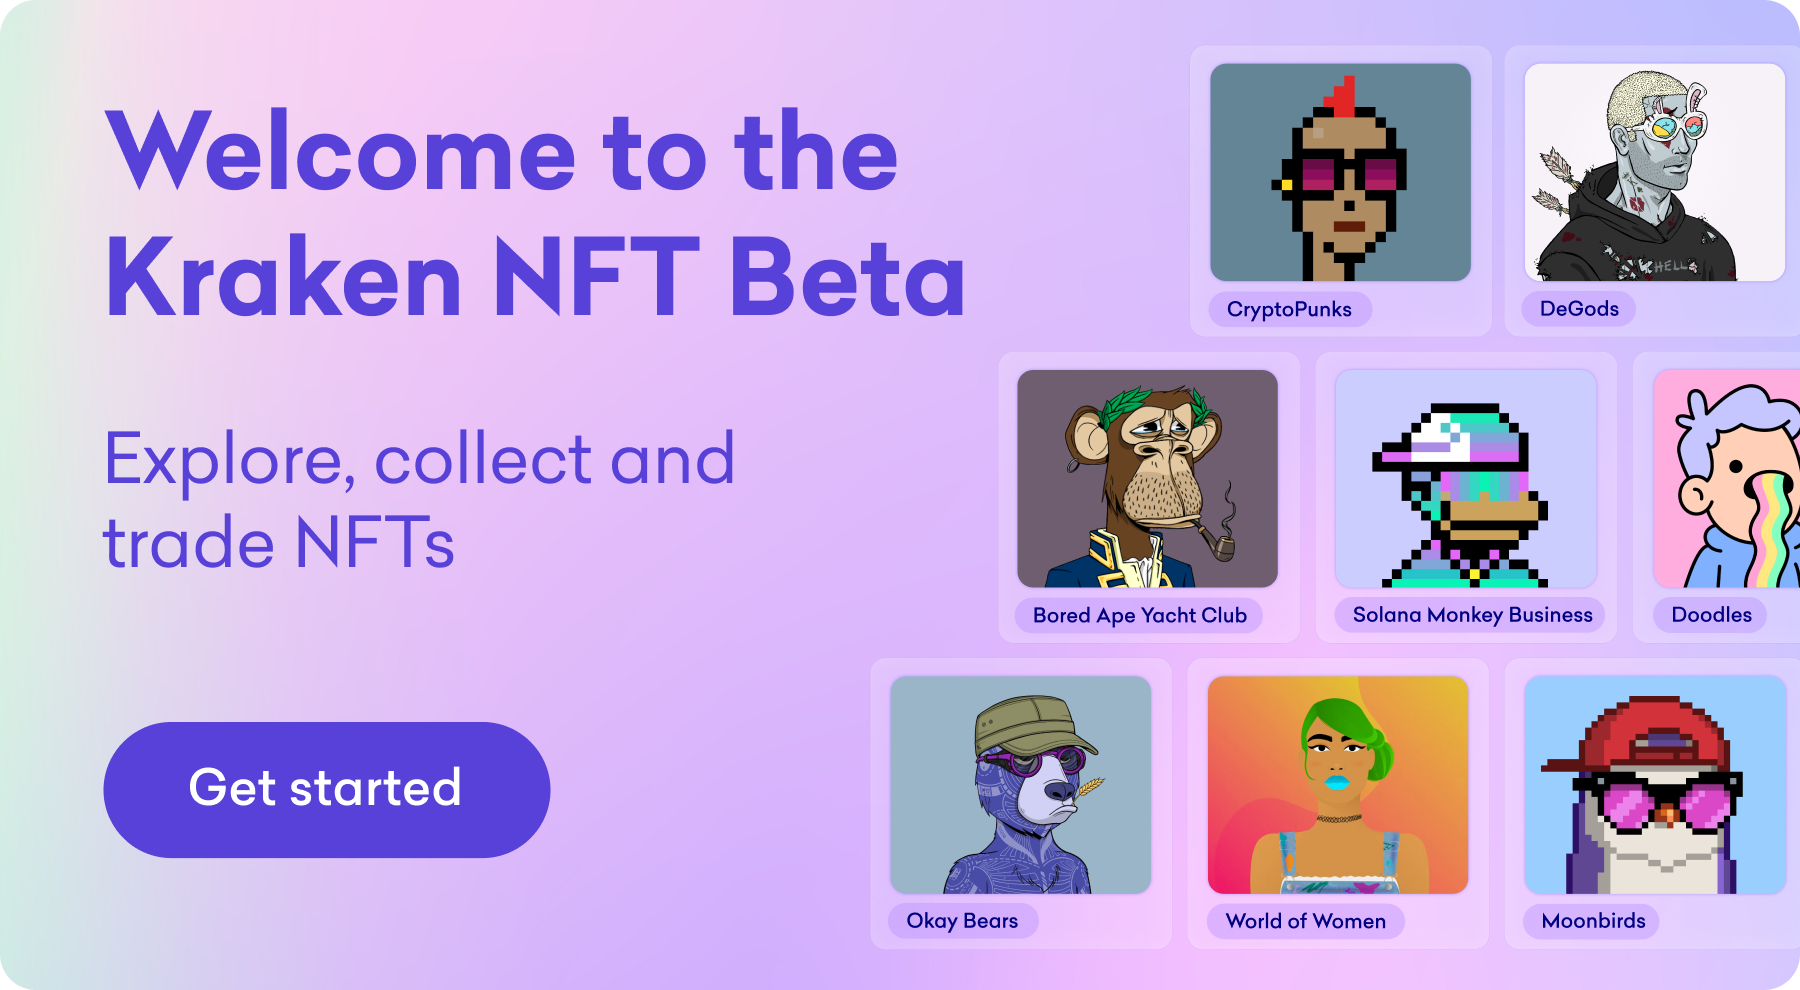 NFTbeta blog Open to all: Explore, collect and trade with the Kraken NFT Public Beta